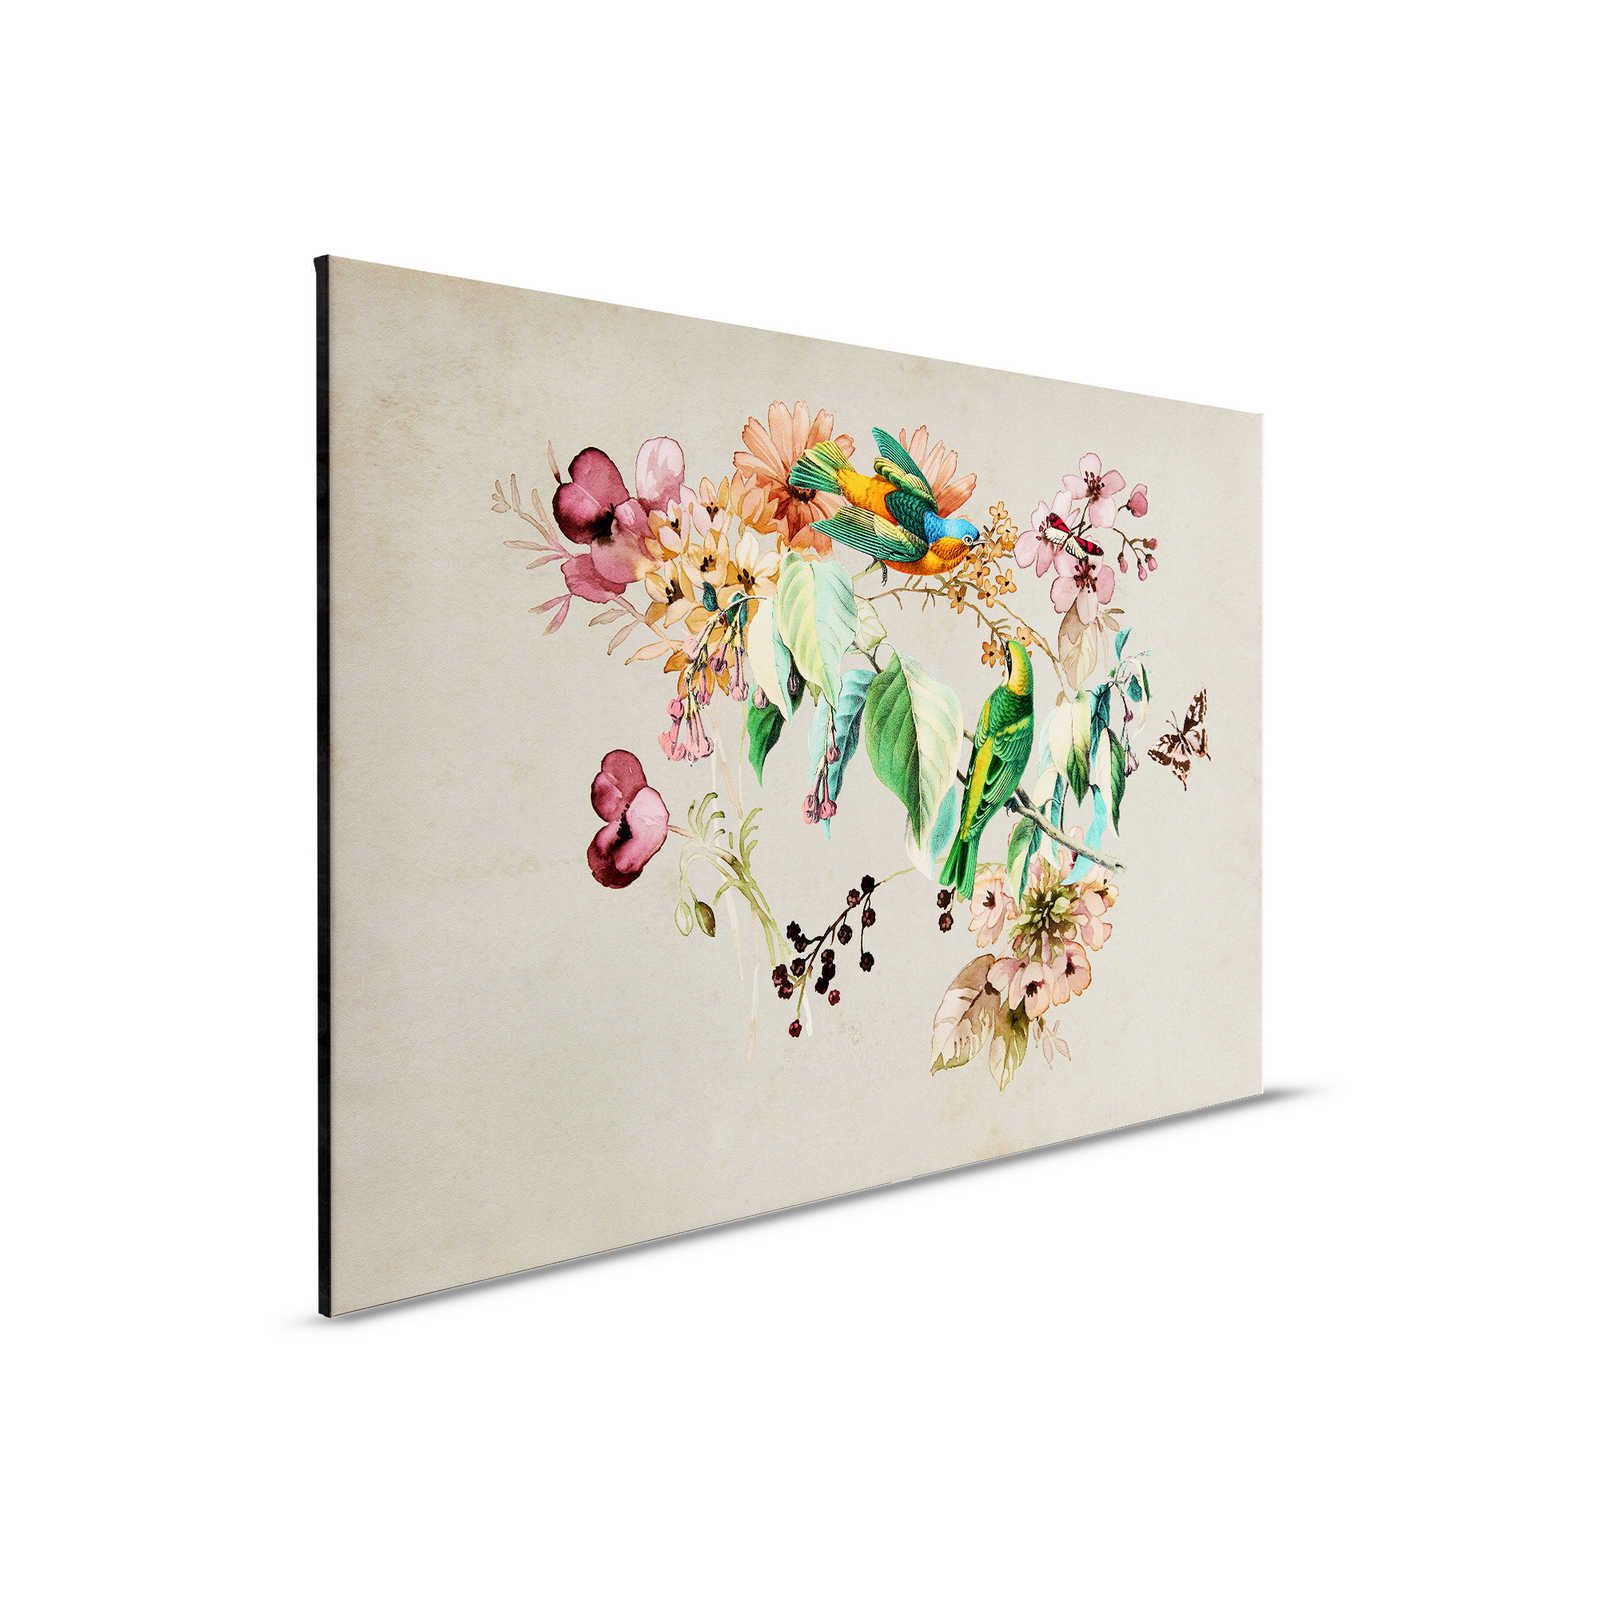 Love Nest 1 - Canvas painting with watercolour flowers & colourful birds - 0.90 m x 0.60 m
